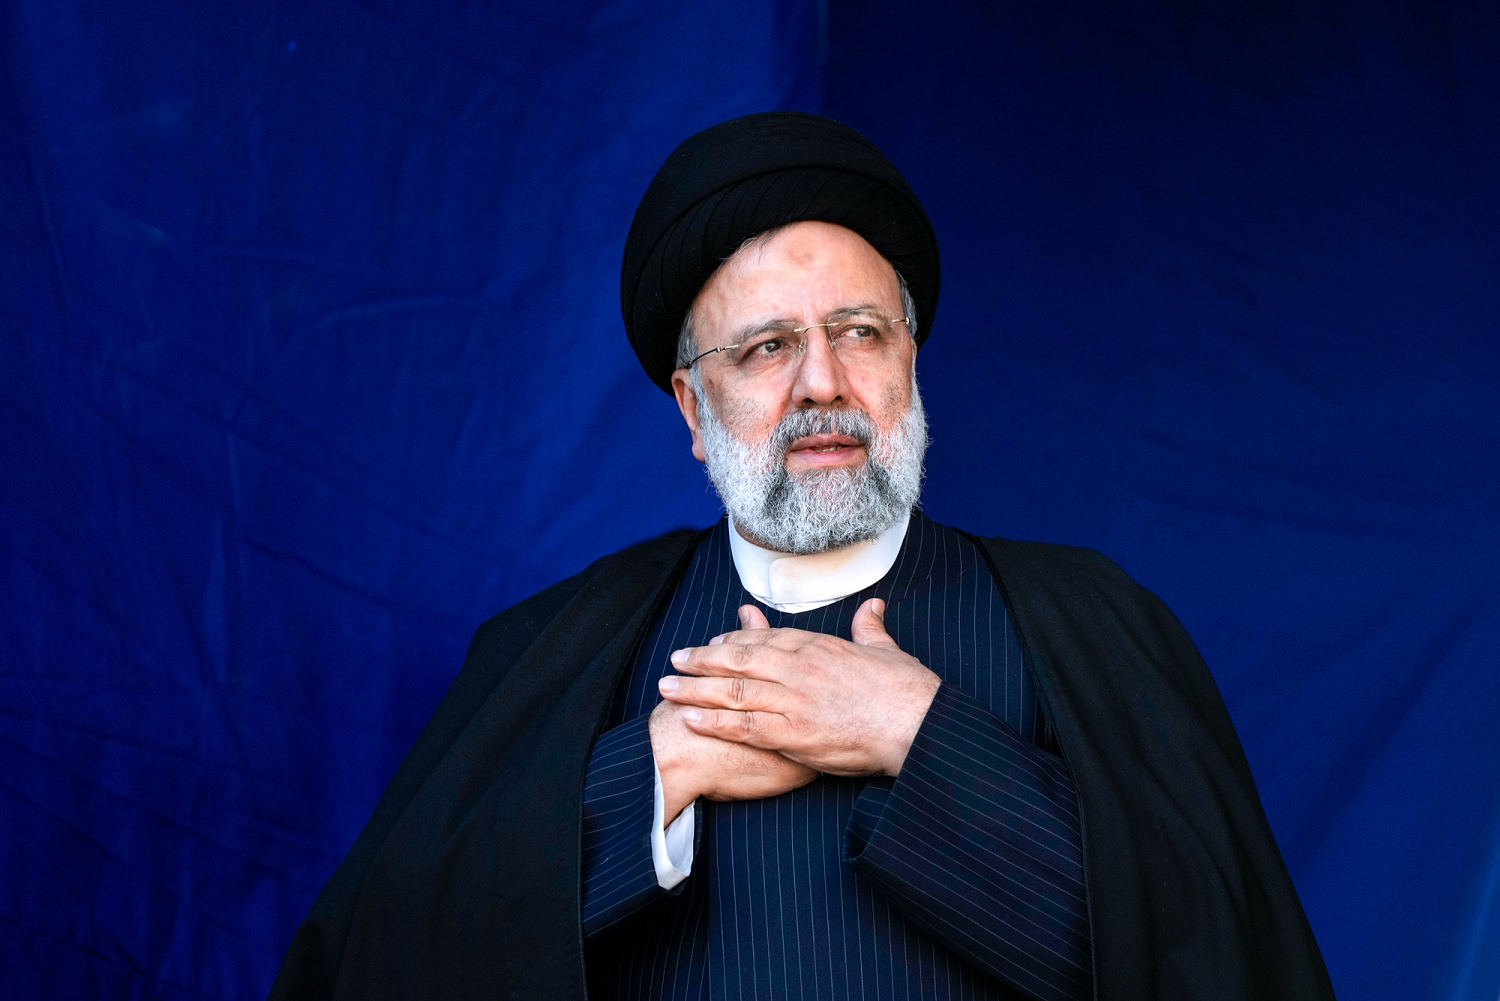 Iranian President Ebrahim Raisi confirmed dead in helicopter crash, state media reports